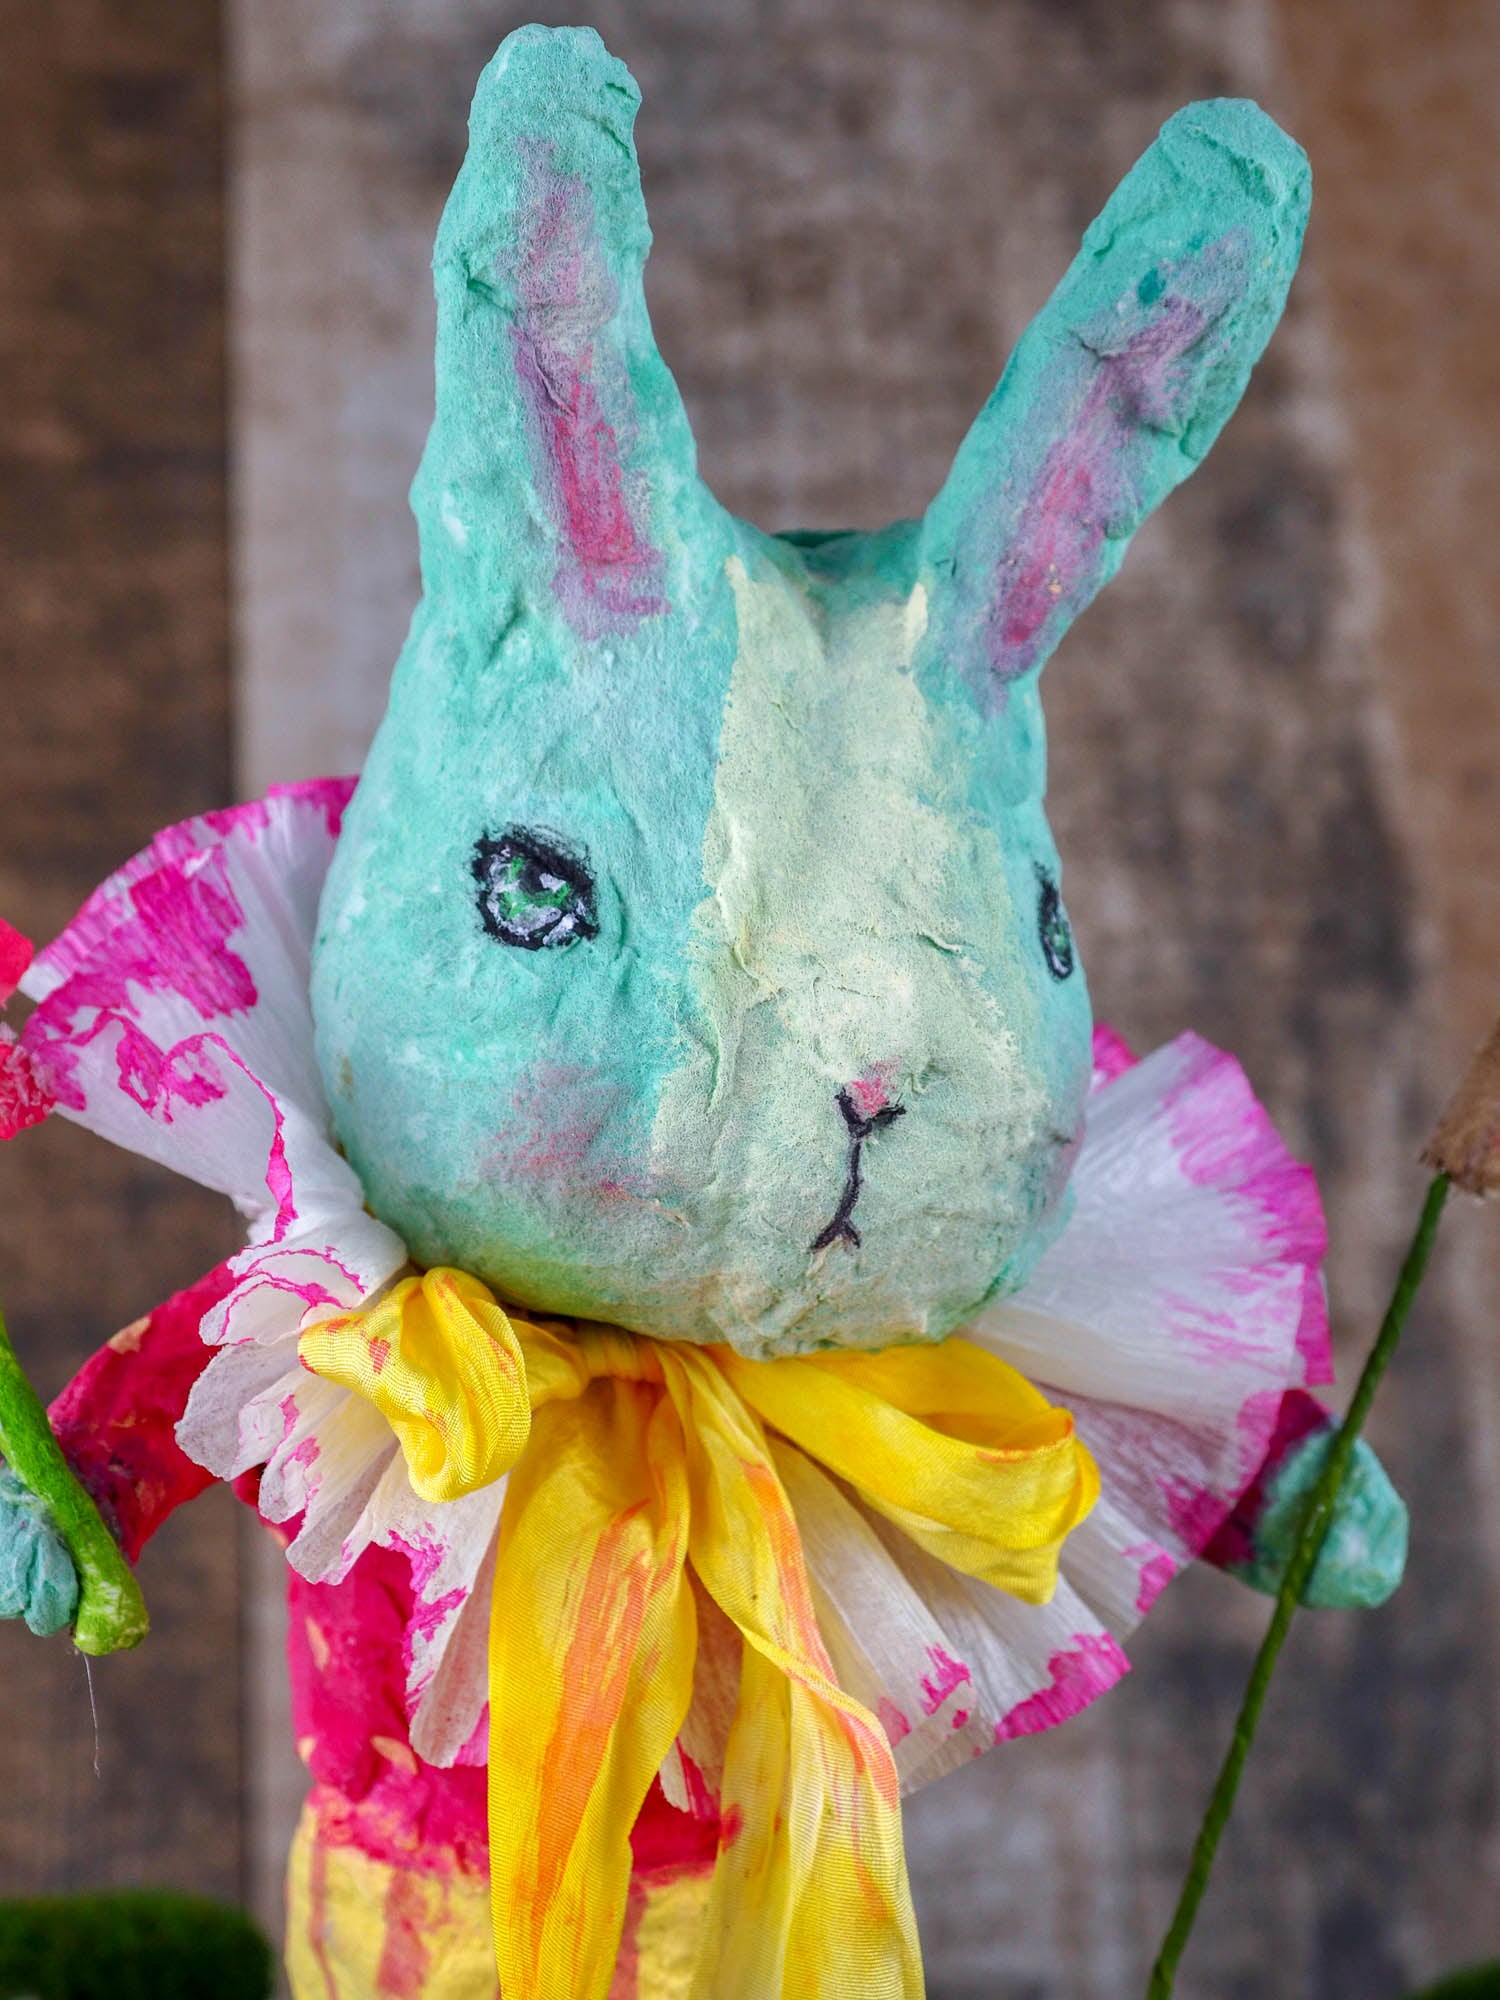 Spring always inspires Danita to make beautiful handmade decorations for when the flowers start to bloom, just like this 10" spun cotton handmade Easter bunny rabbit art doll by Danita, hand painted and dressed in a colorful yellow jumper suit.